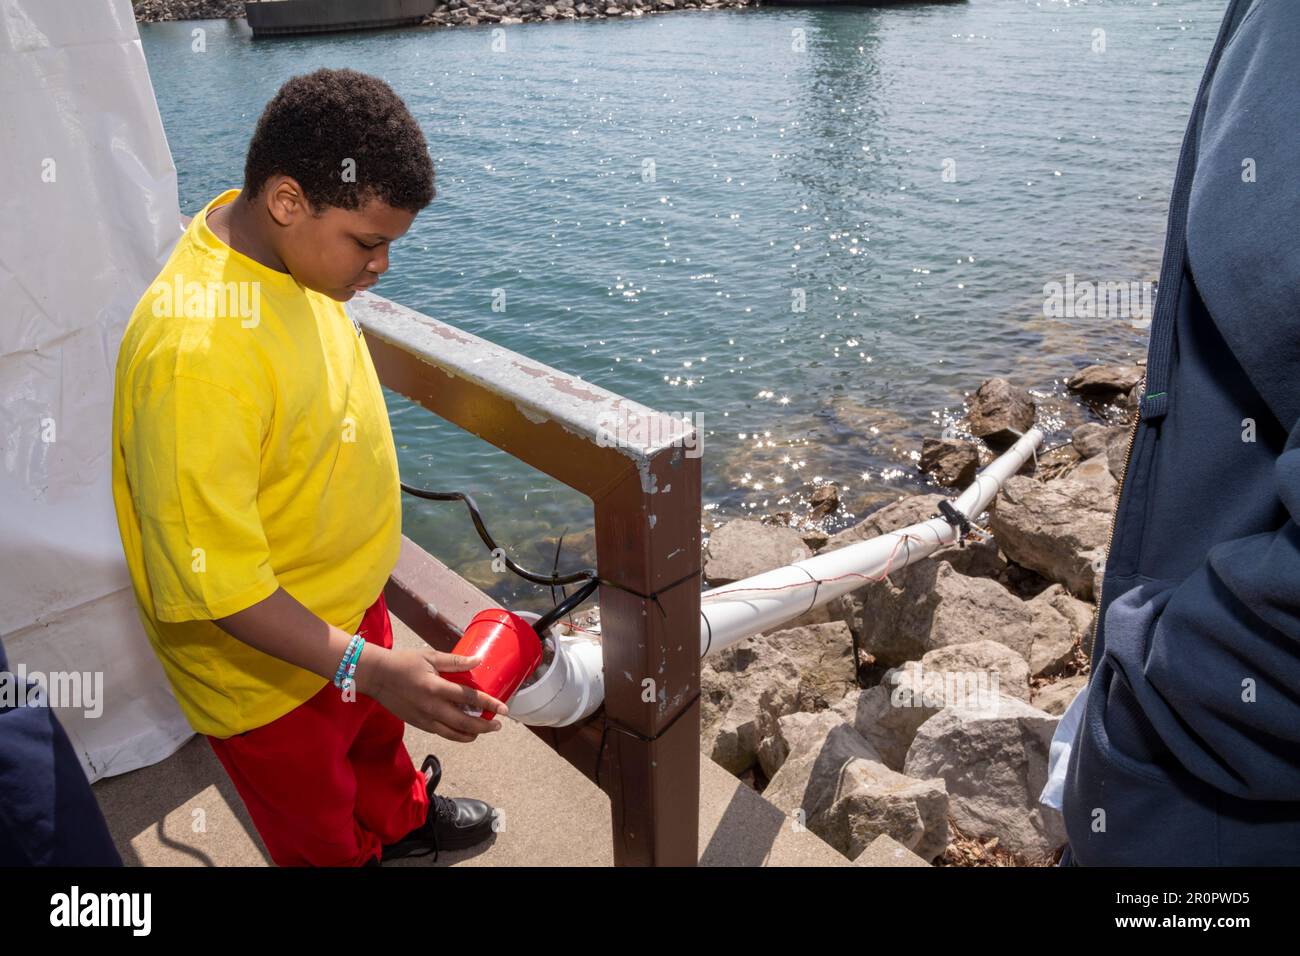 Detroit, Michigan - Chilren helped stock salmon fry in the Detroit River by releasing them into a tube leading to the river at Milliken State Park. Stock Photo